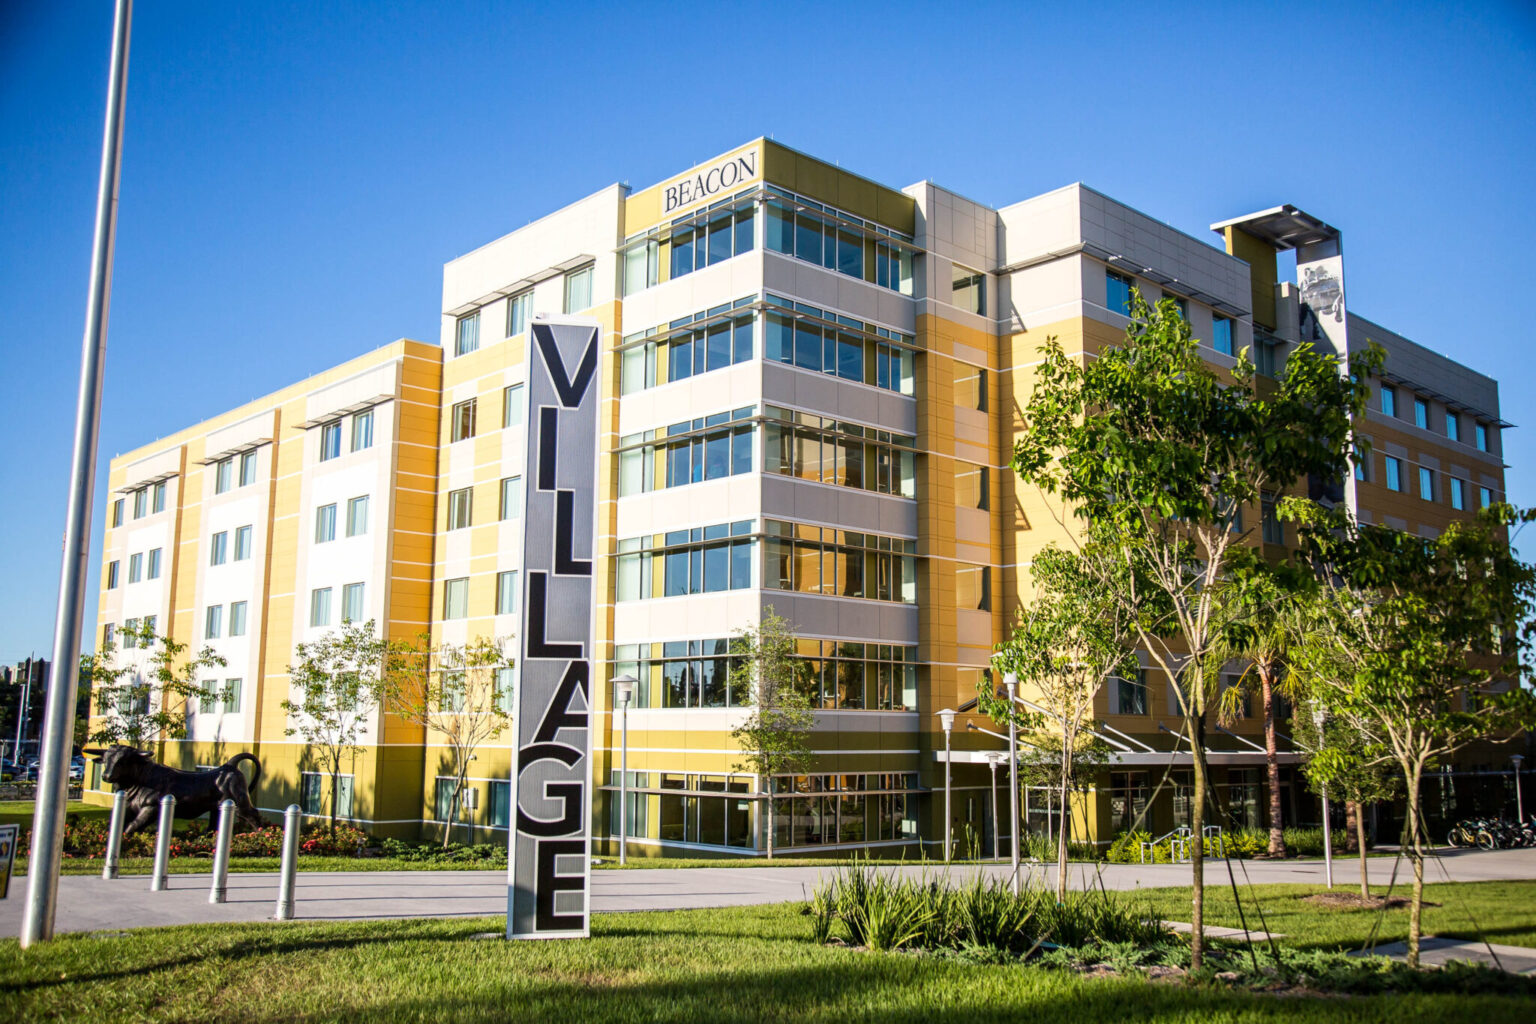 USF students struggle to find housing as classes roll in The Oracle